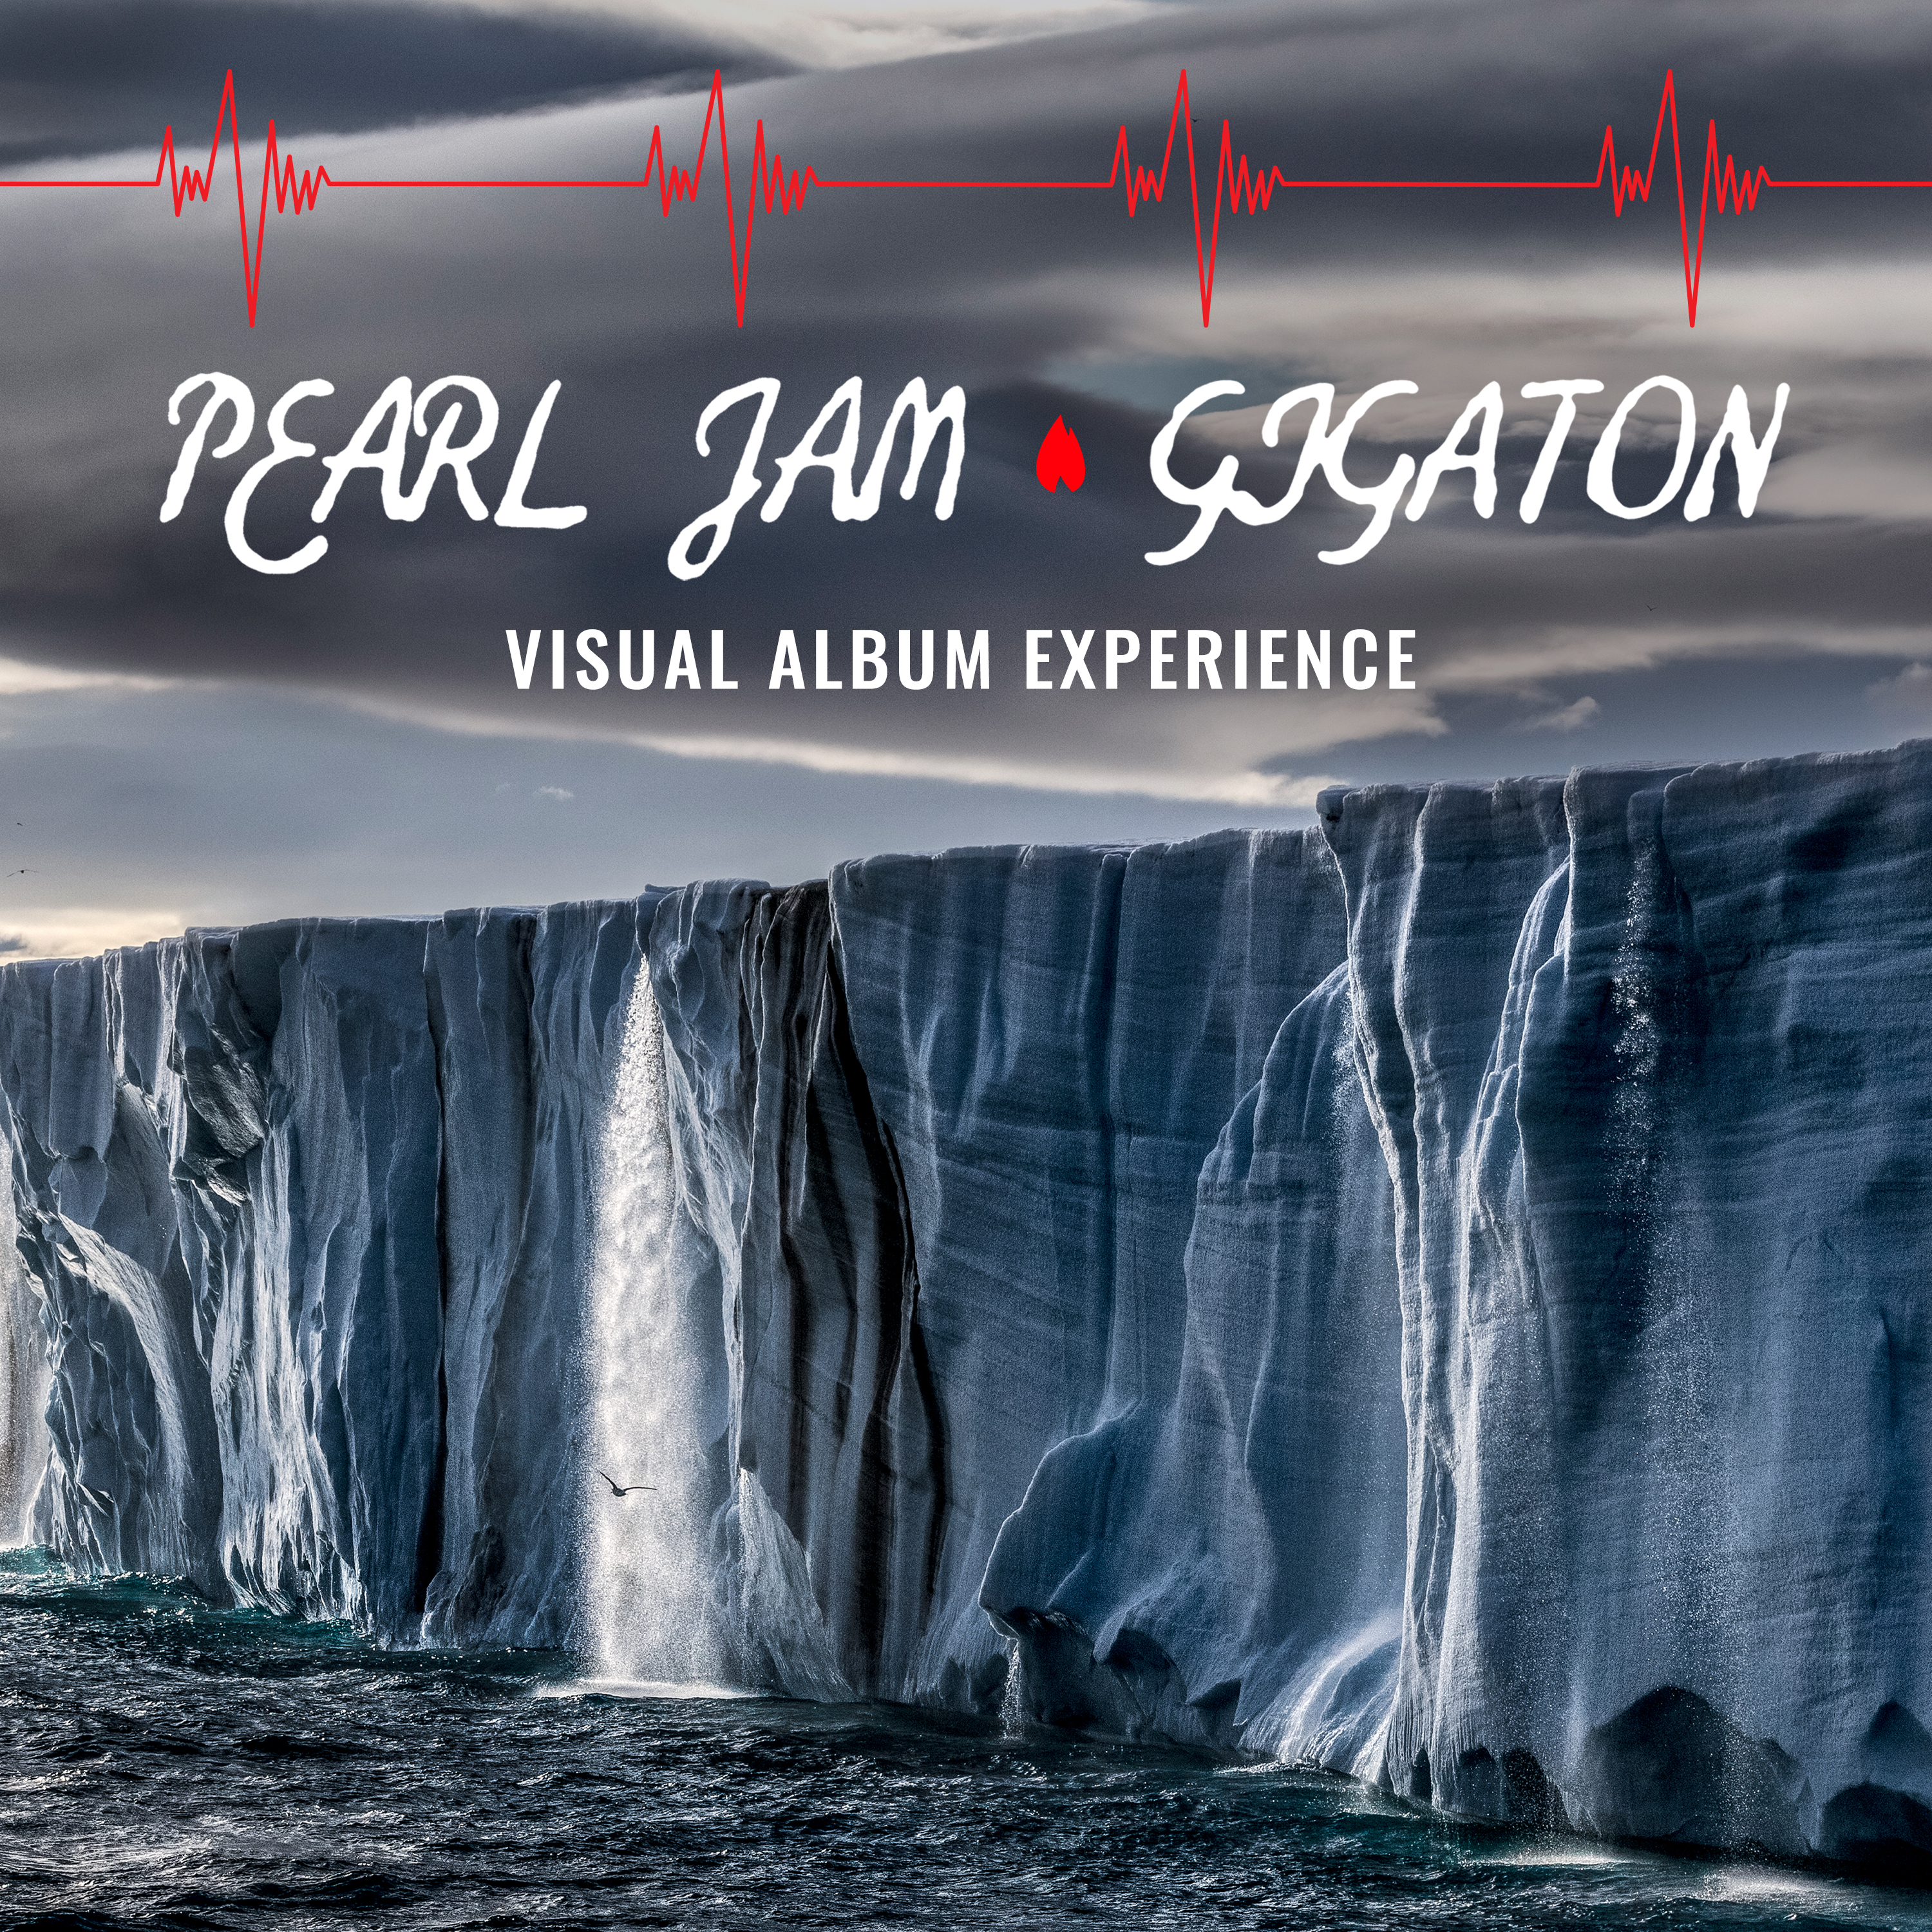 PEARL JAM TO RELEASE GIGATON VISUAL EXPERIENCE ON APPLE TV 4K IN DOLBY ATMOS AND DOLBY VISION